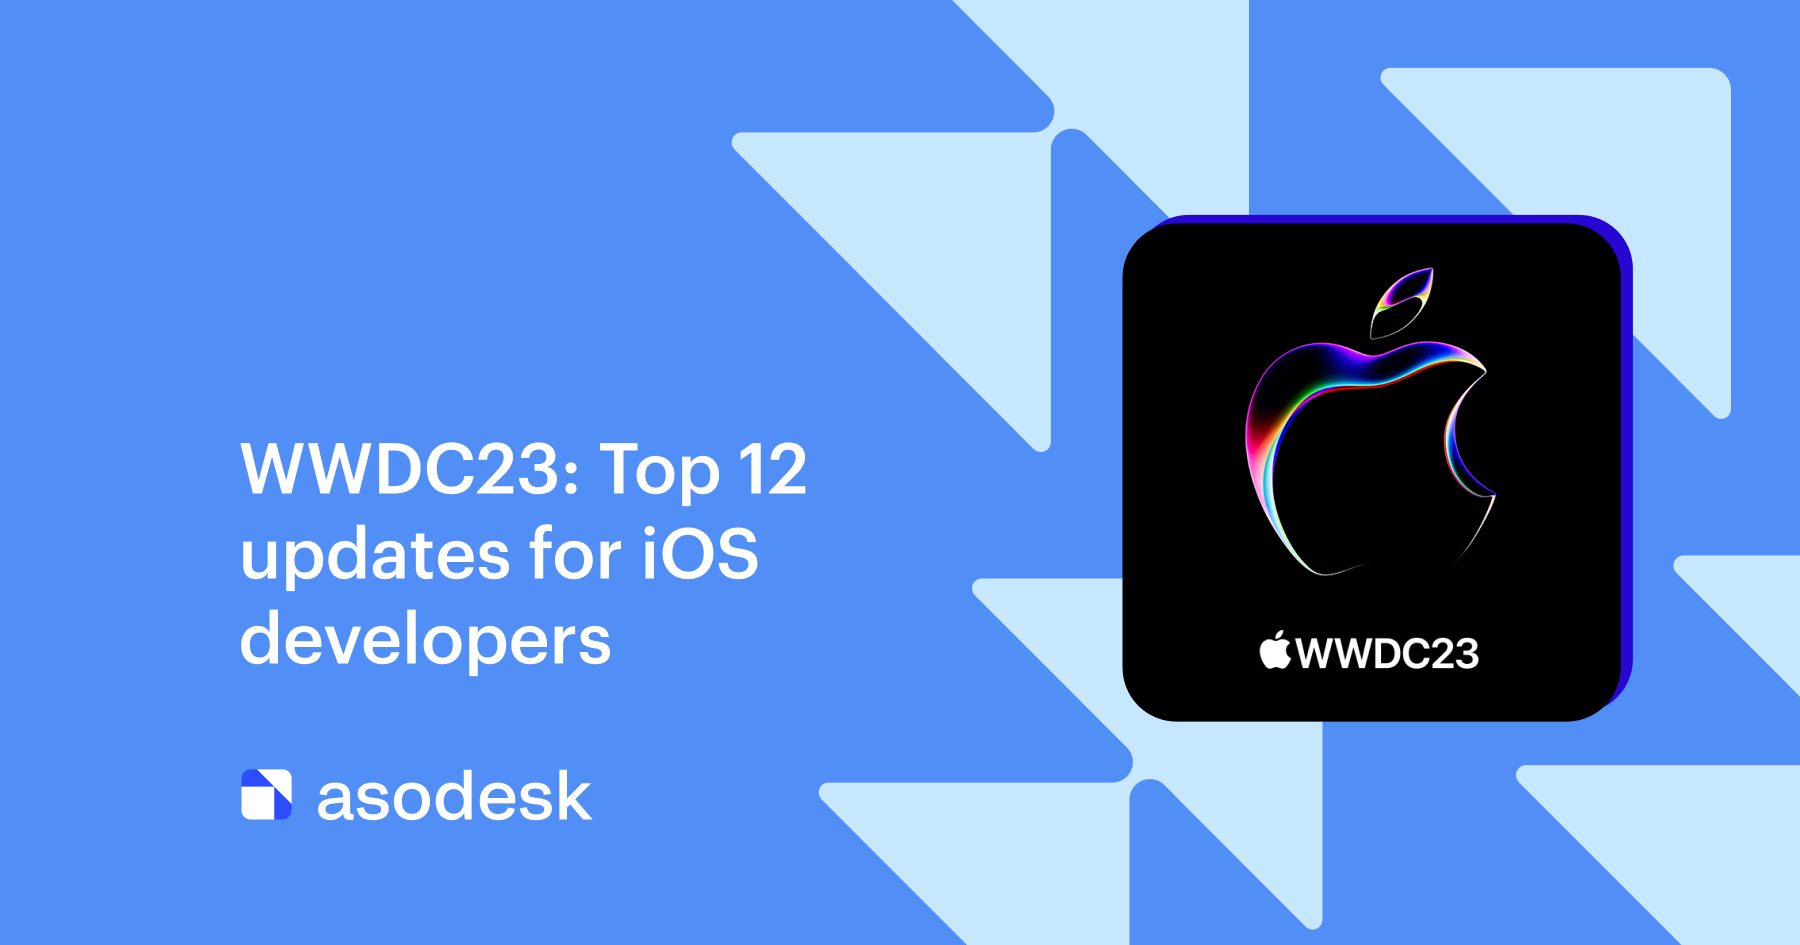 WWDC23: Top 12 updates for iOS developers